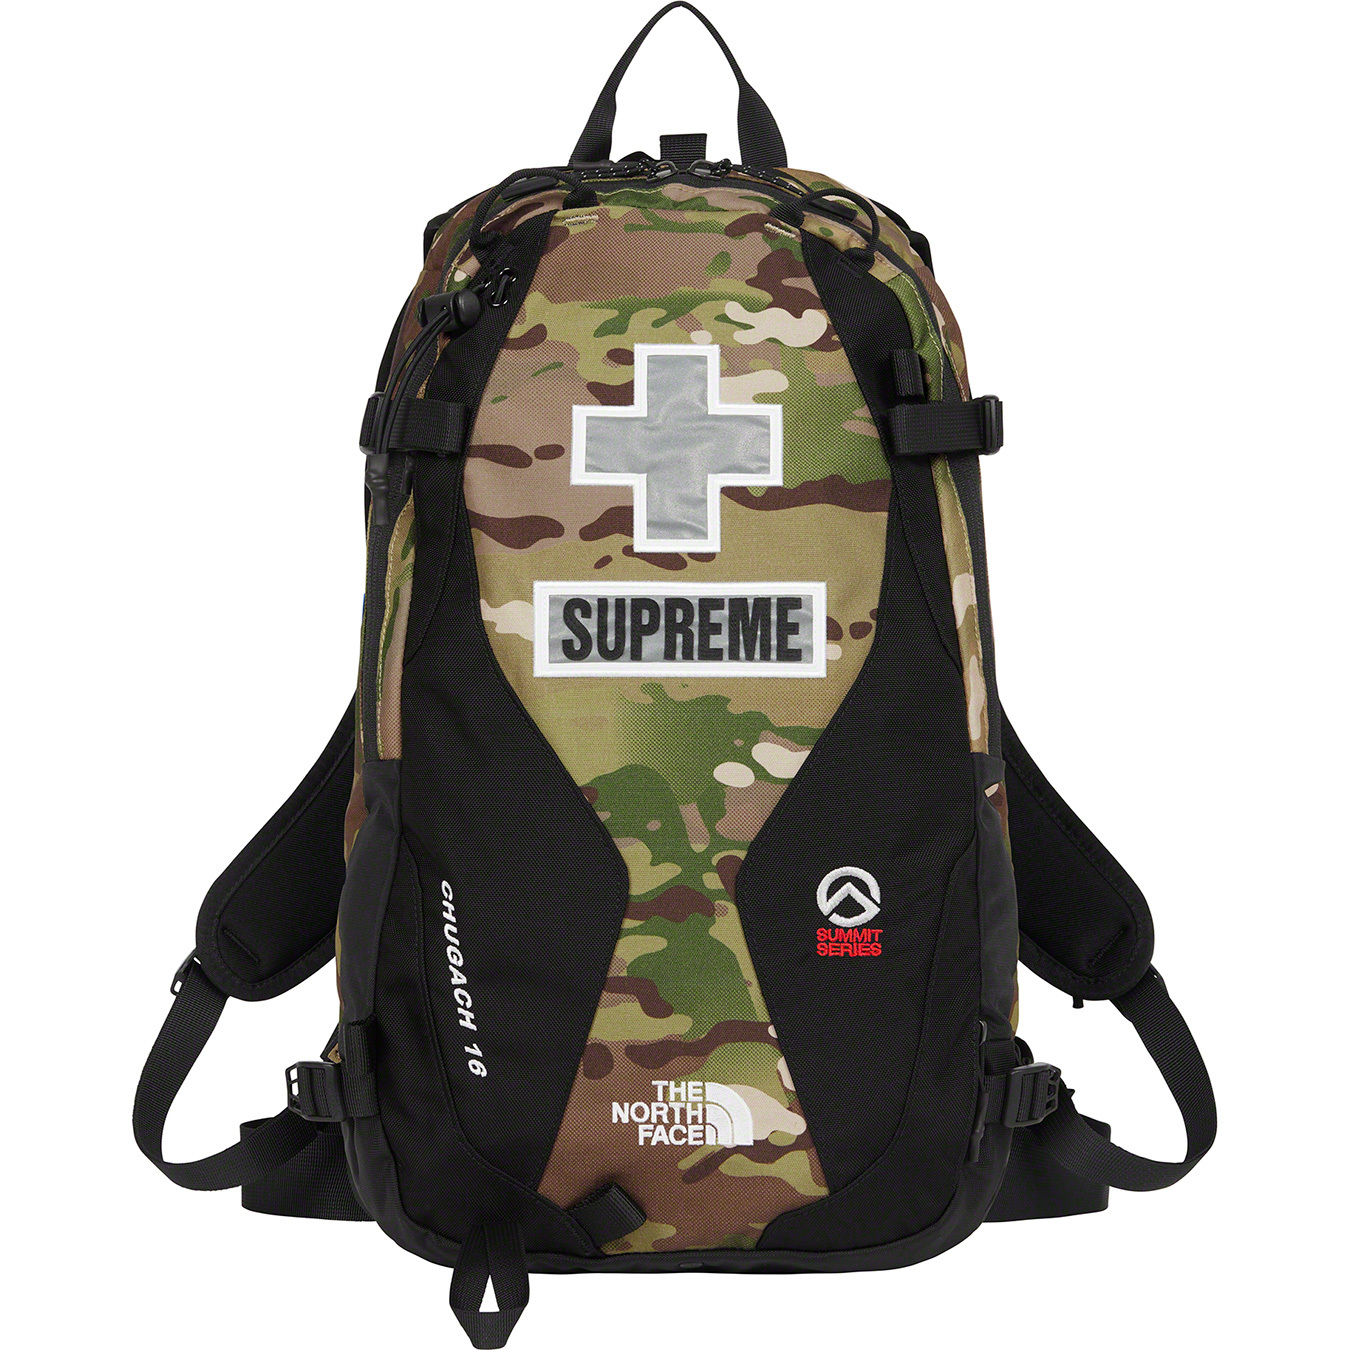 Supreme®/The North Face® Summit Series Rescue Chugach 16 Backpack